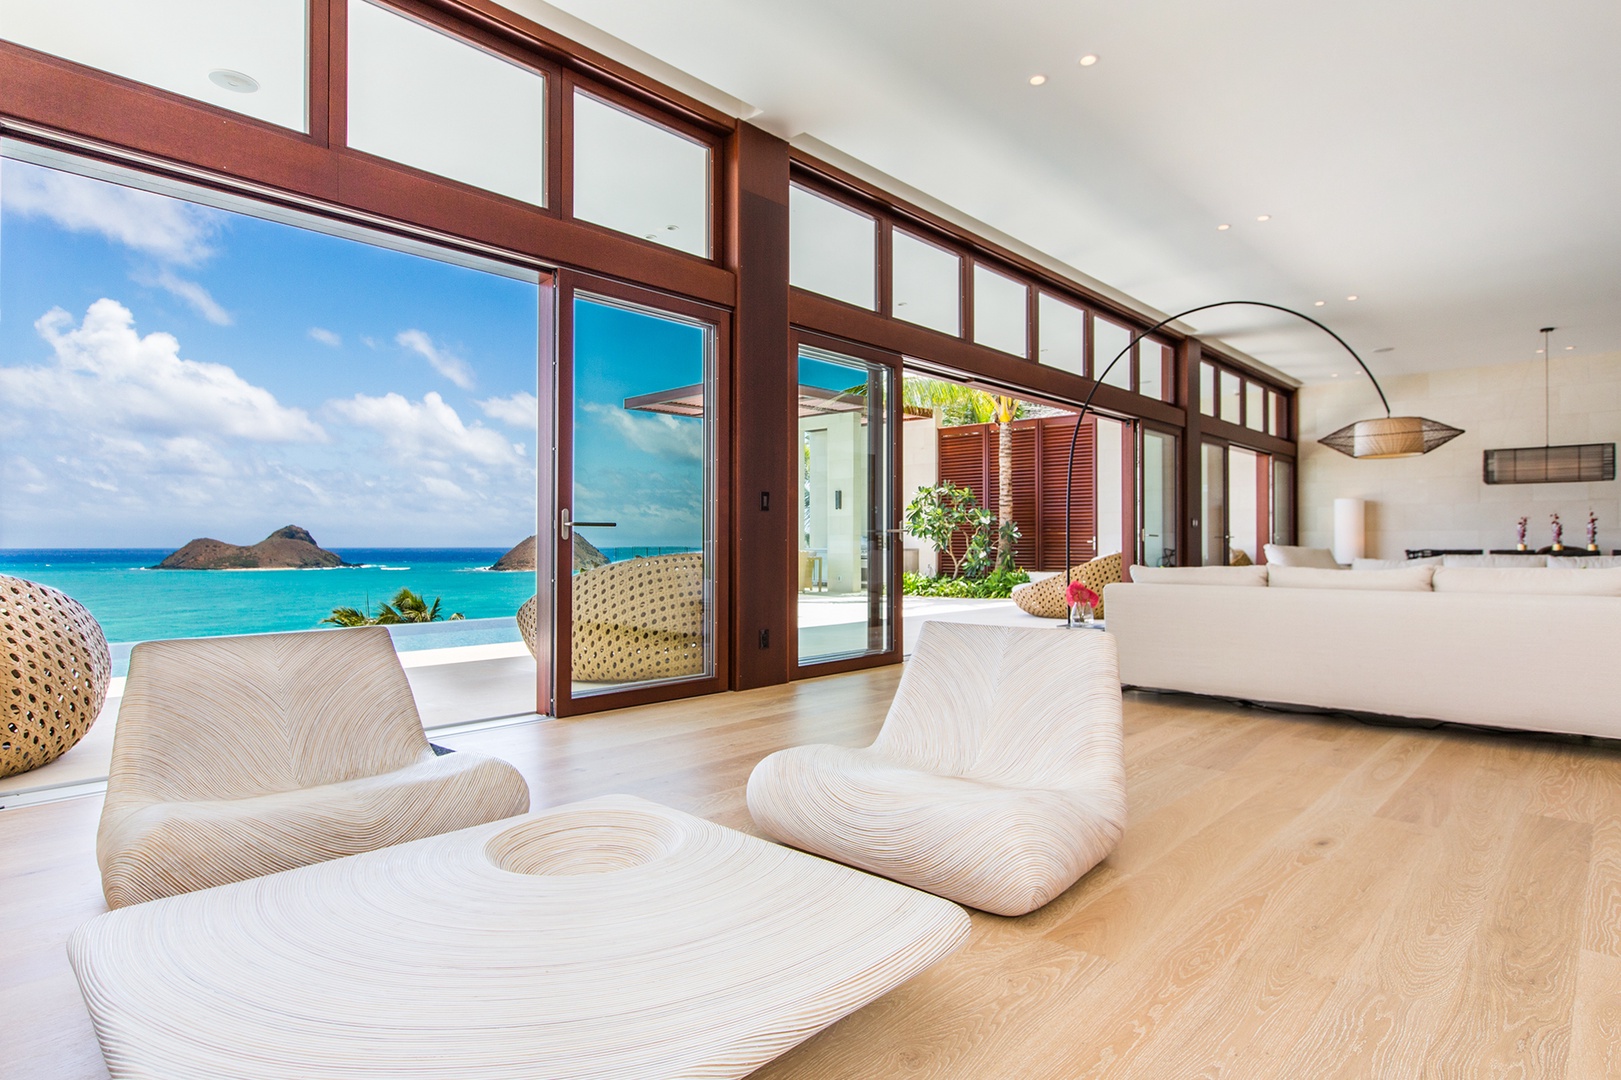 Kailua Vacation Rentals, Lanikai Hillside Estate - Living Room with views from every angle